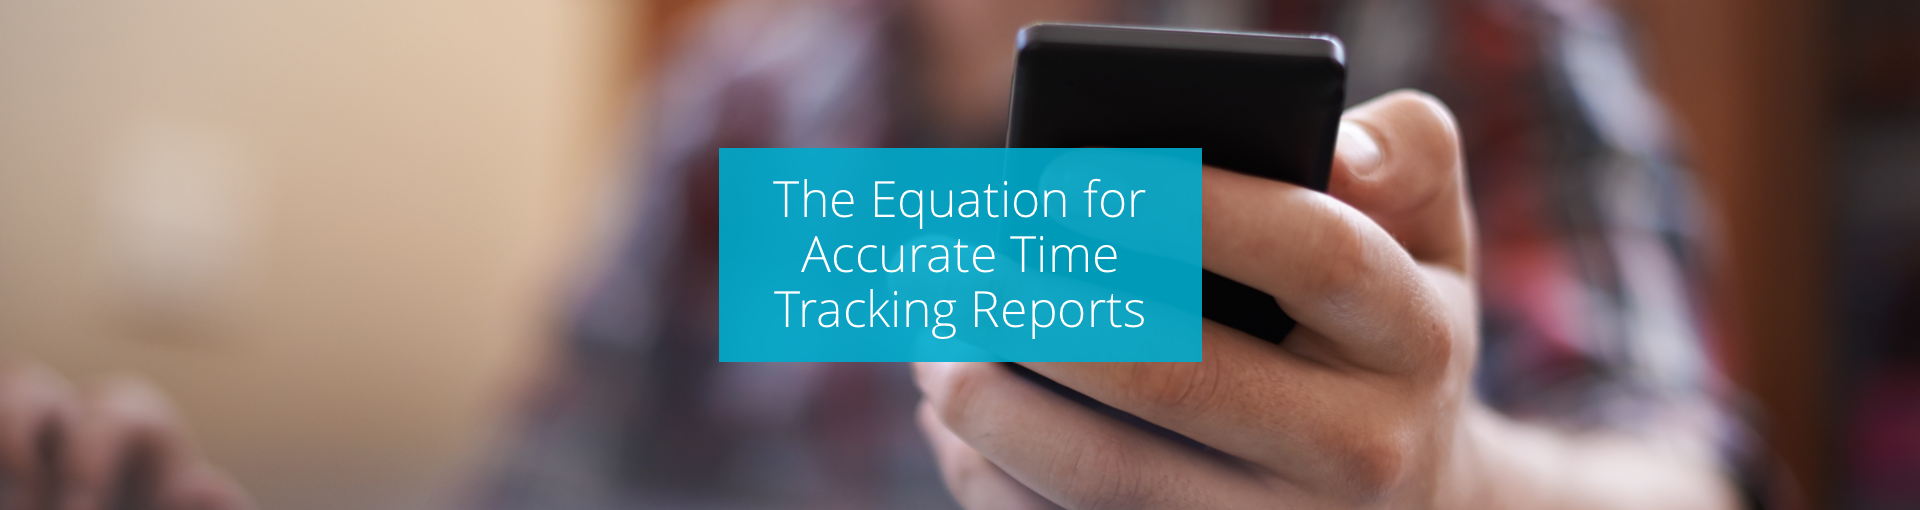 The Equation for Accurate Time Tracking Reports Featured Image